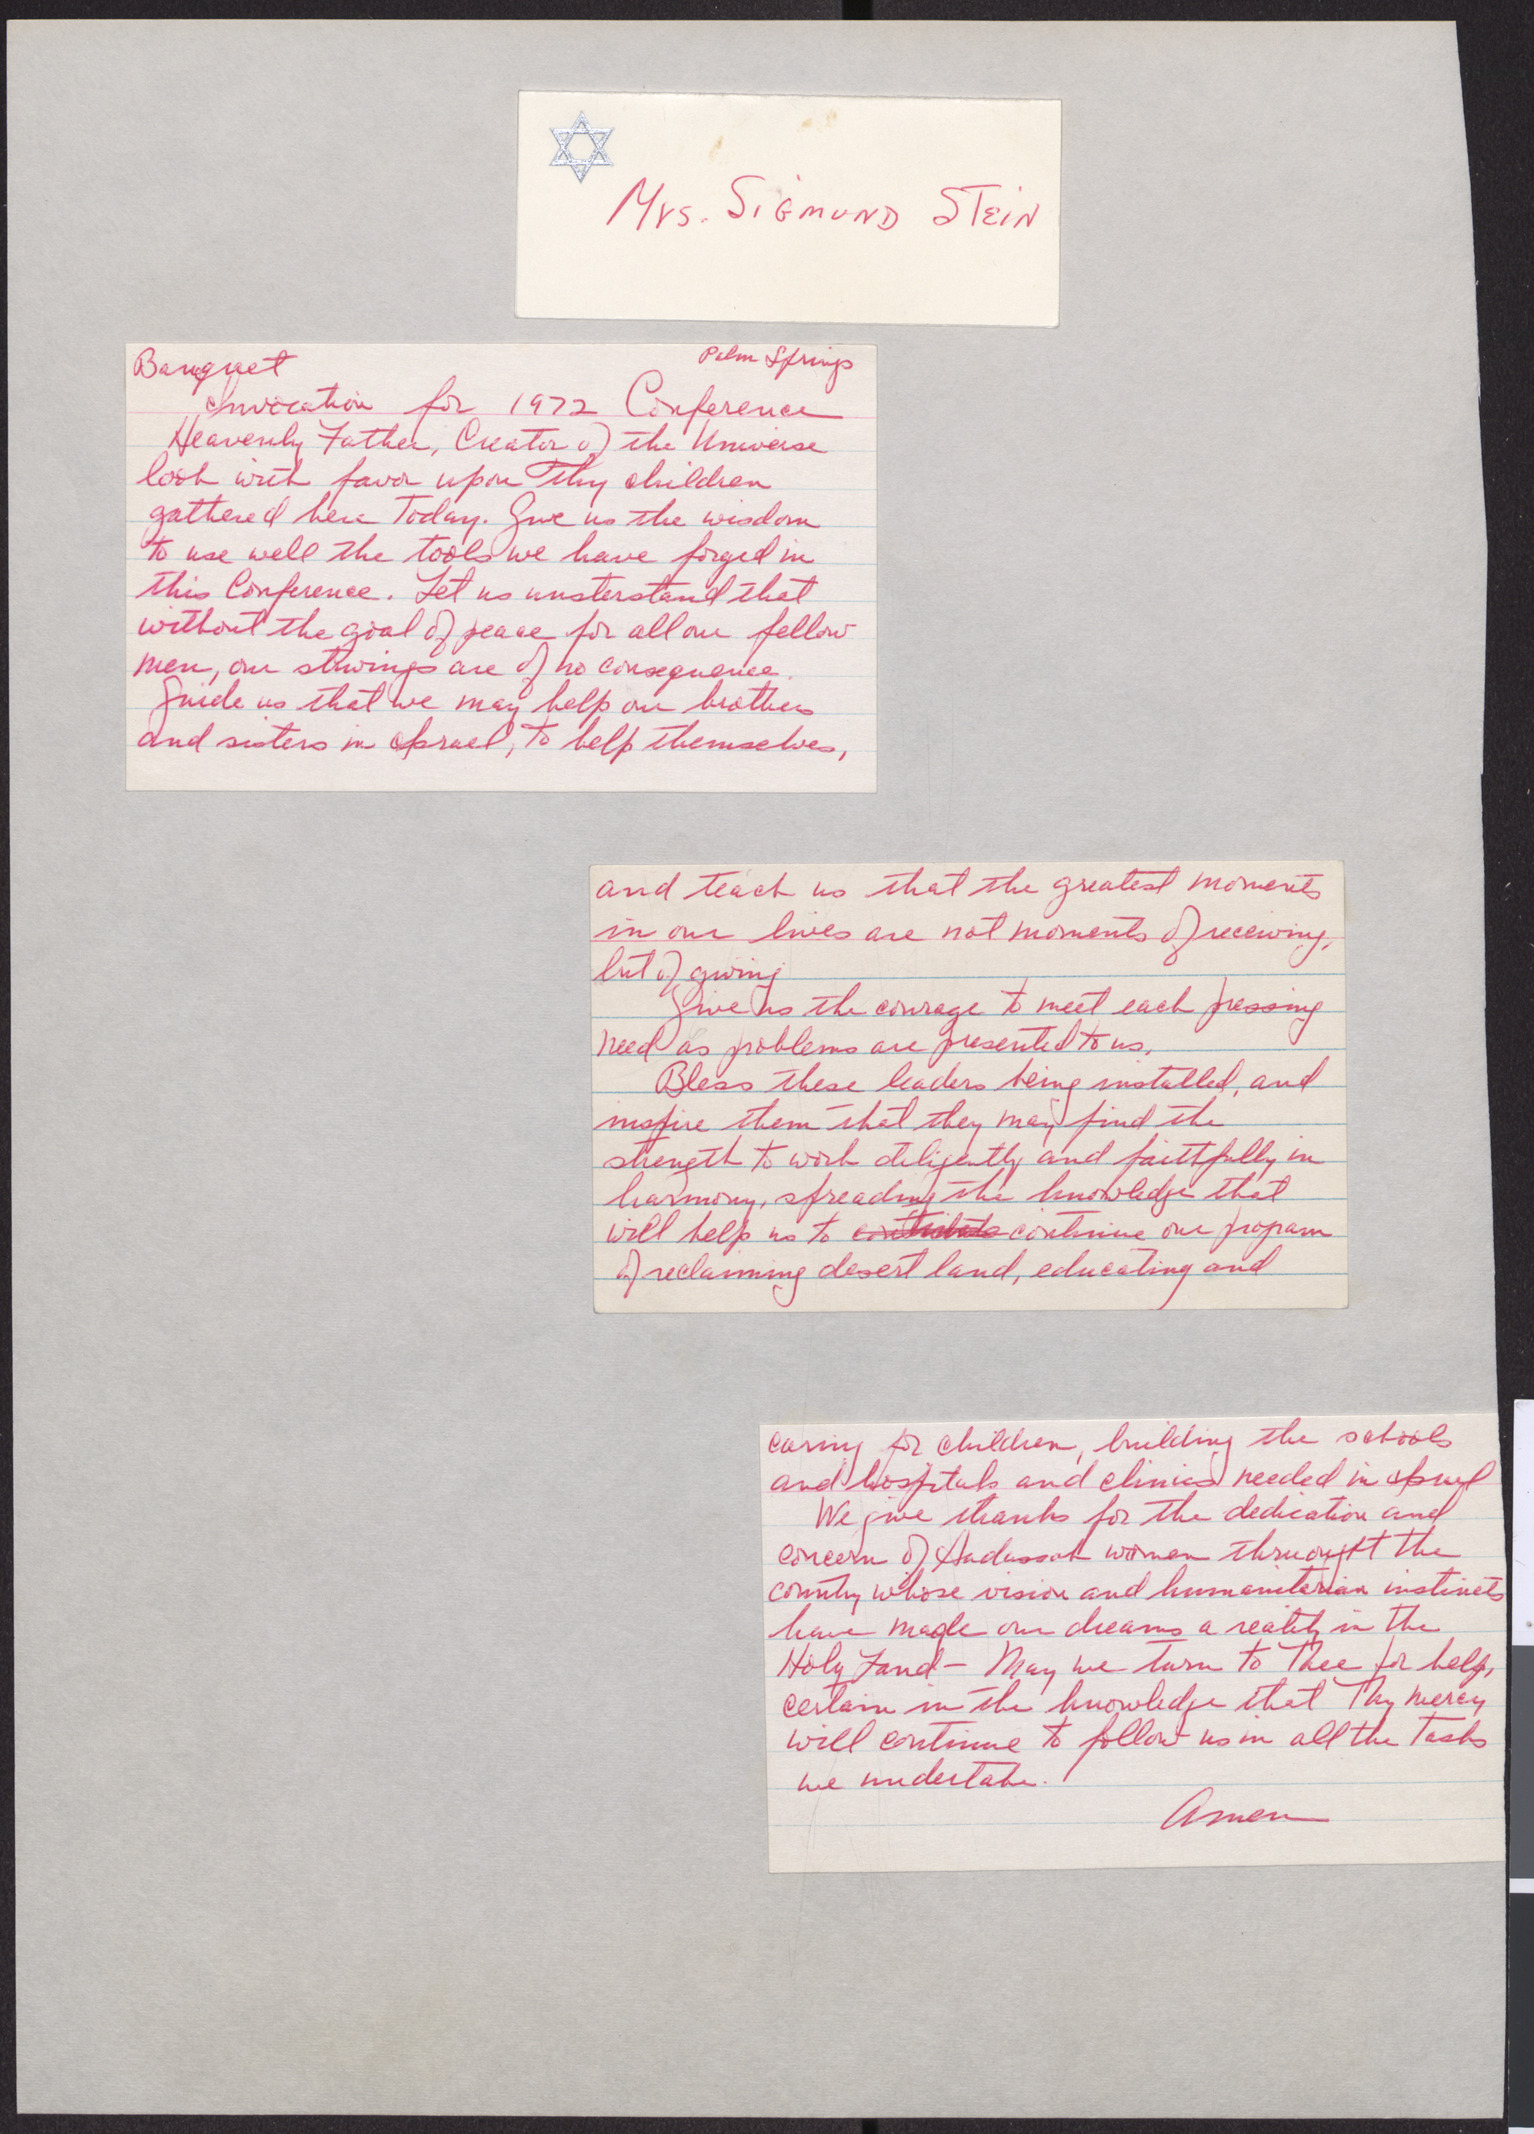 Name card for Mrs. Sigmund Stein, and handwritten notes for invocation at 1972 conference, Palm Springs